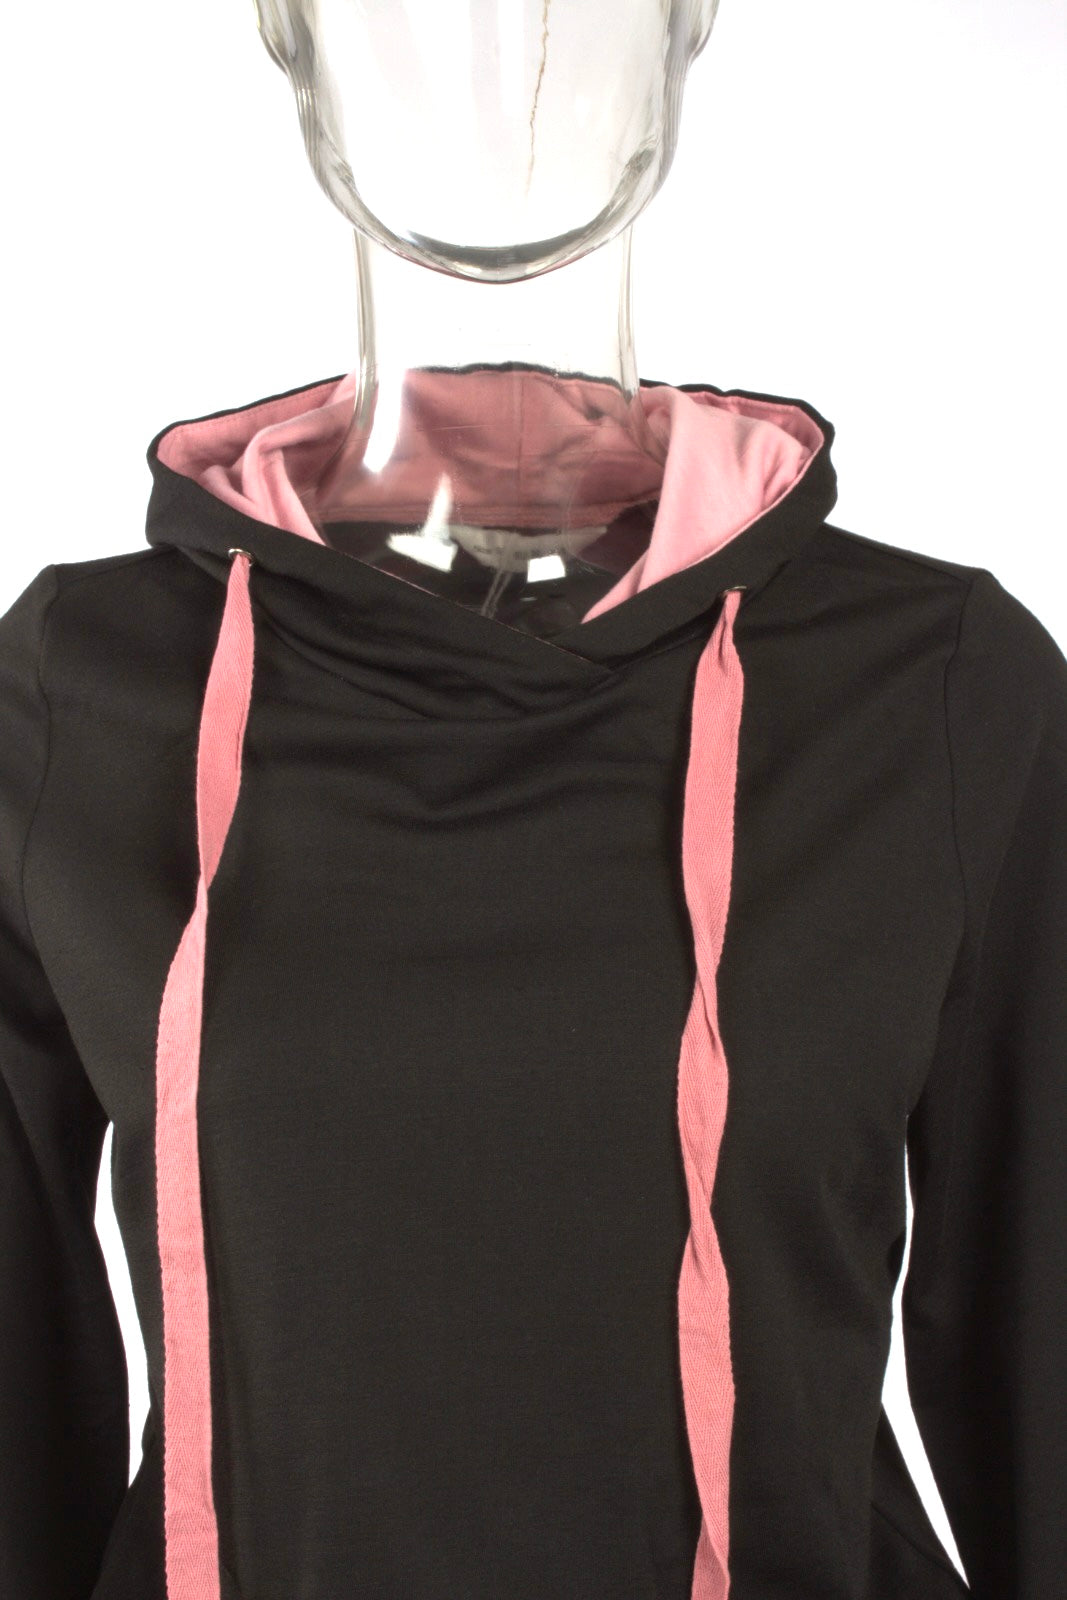 Active Wear Dress With Hood